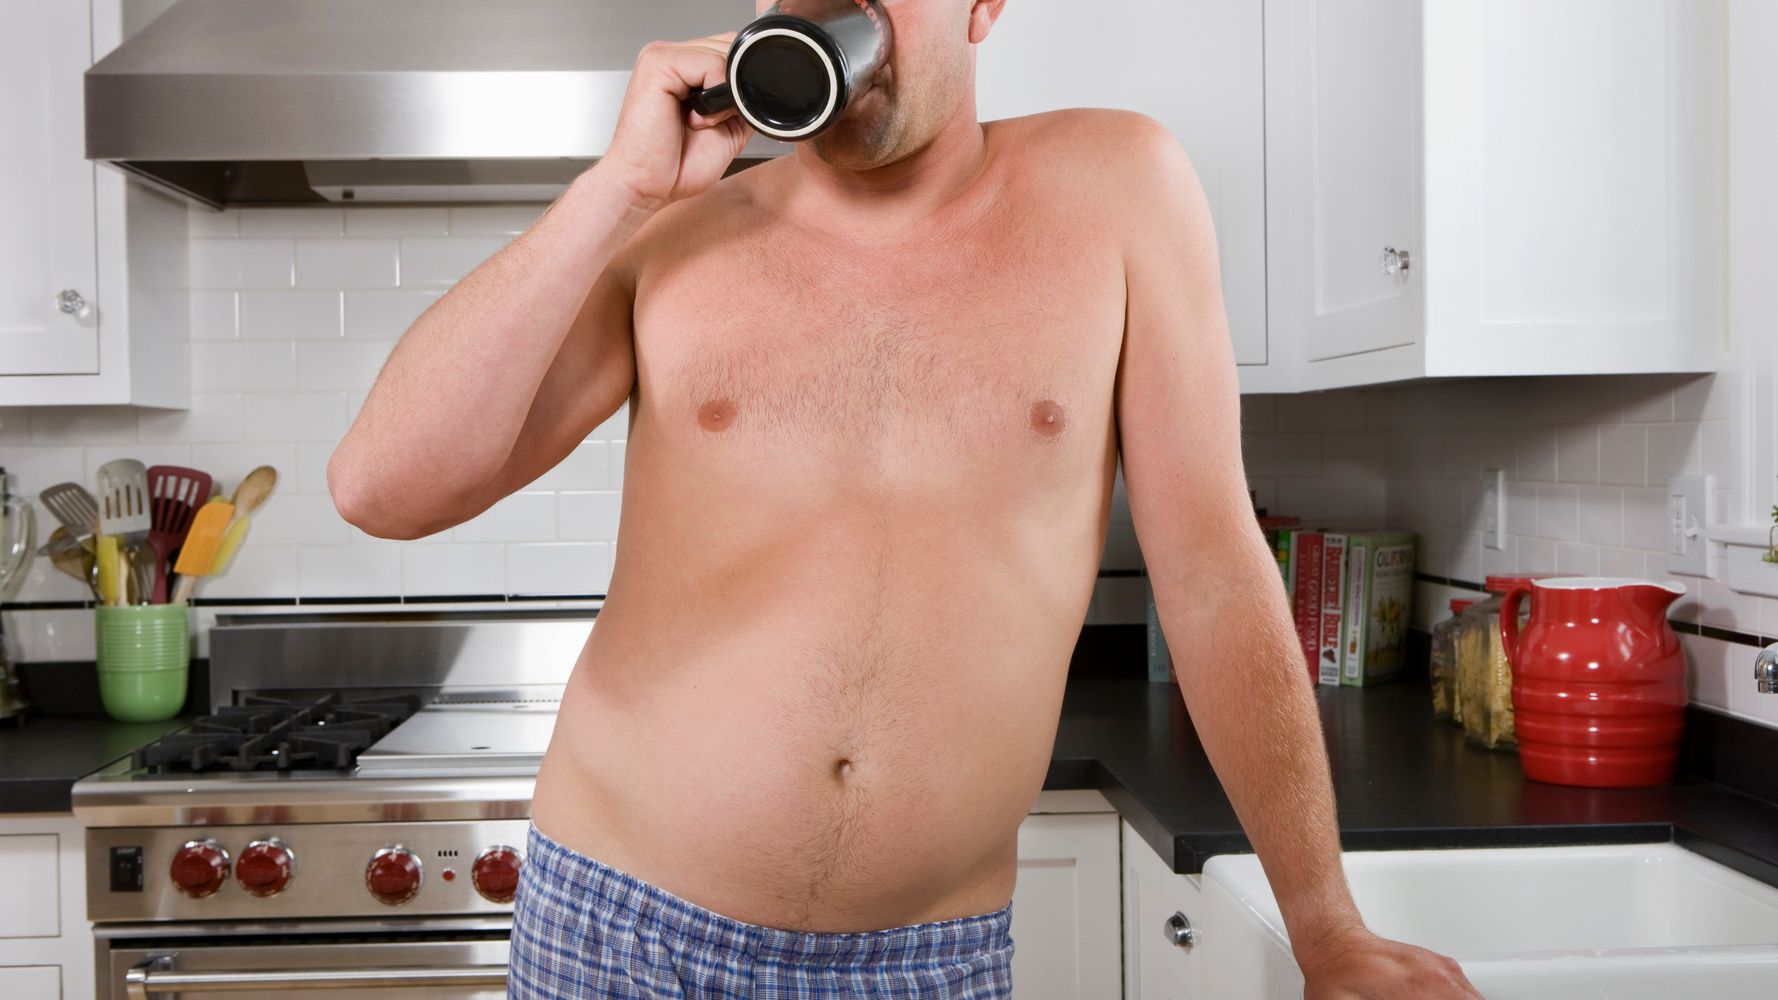 "The dad bod dad is not so much a person as an organizational prin...